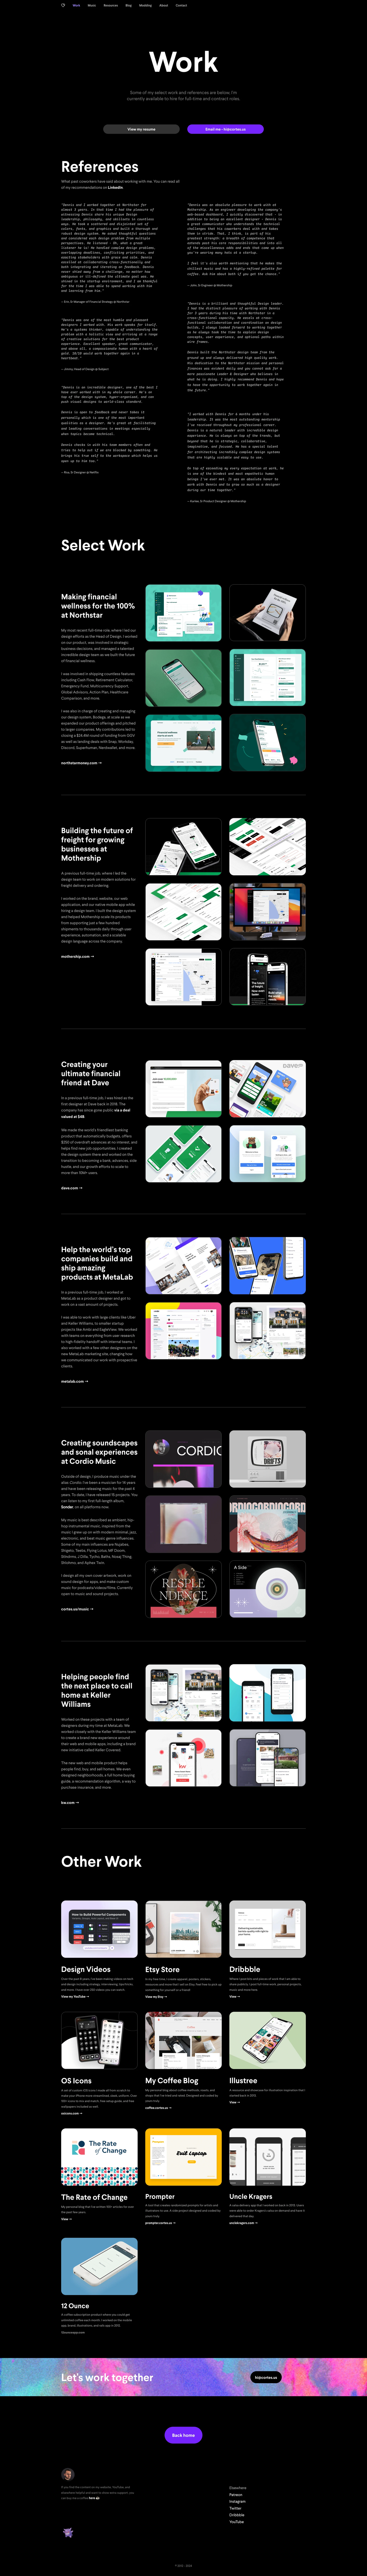 Dennis Cortés Landing Page Example: Dennis is a designer with 10 years of experience in building design teams and products used by millions of people (Uber, Facebook, Dave, KW). Available for design advising and product validation services.